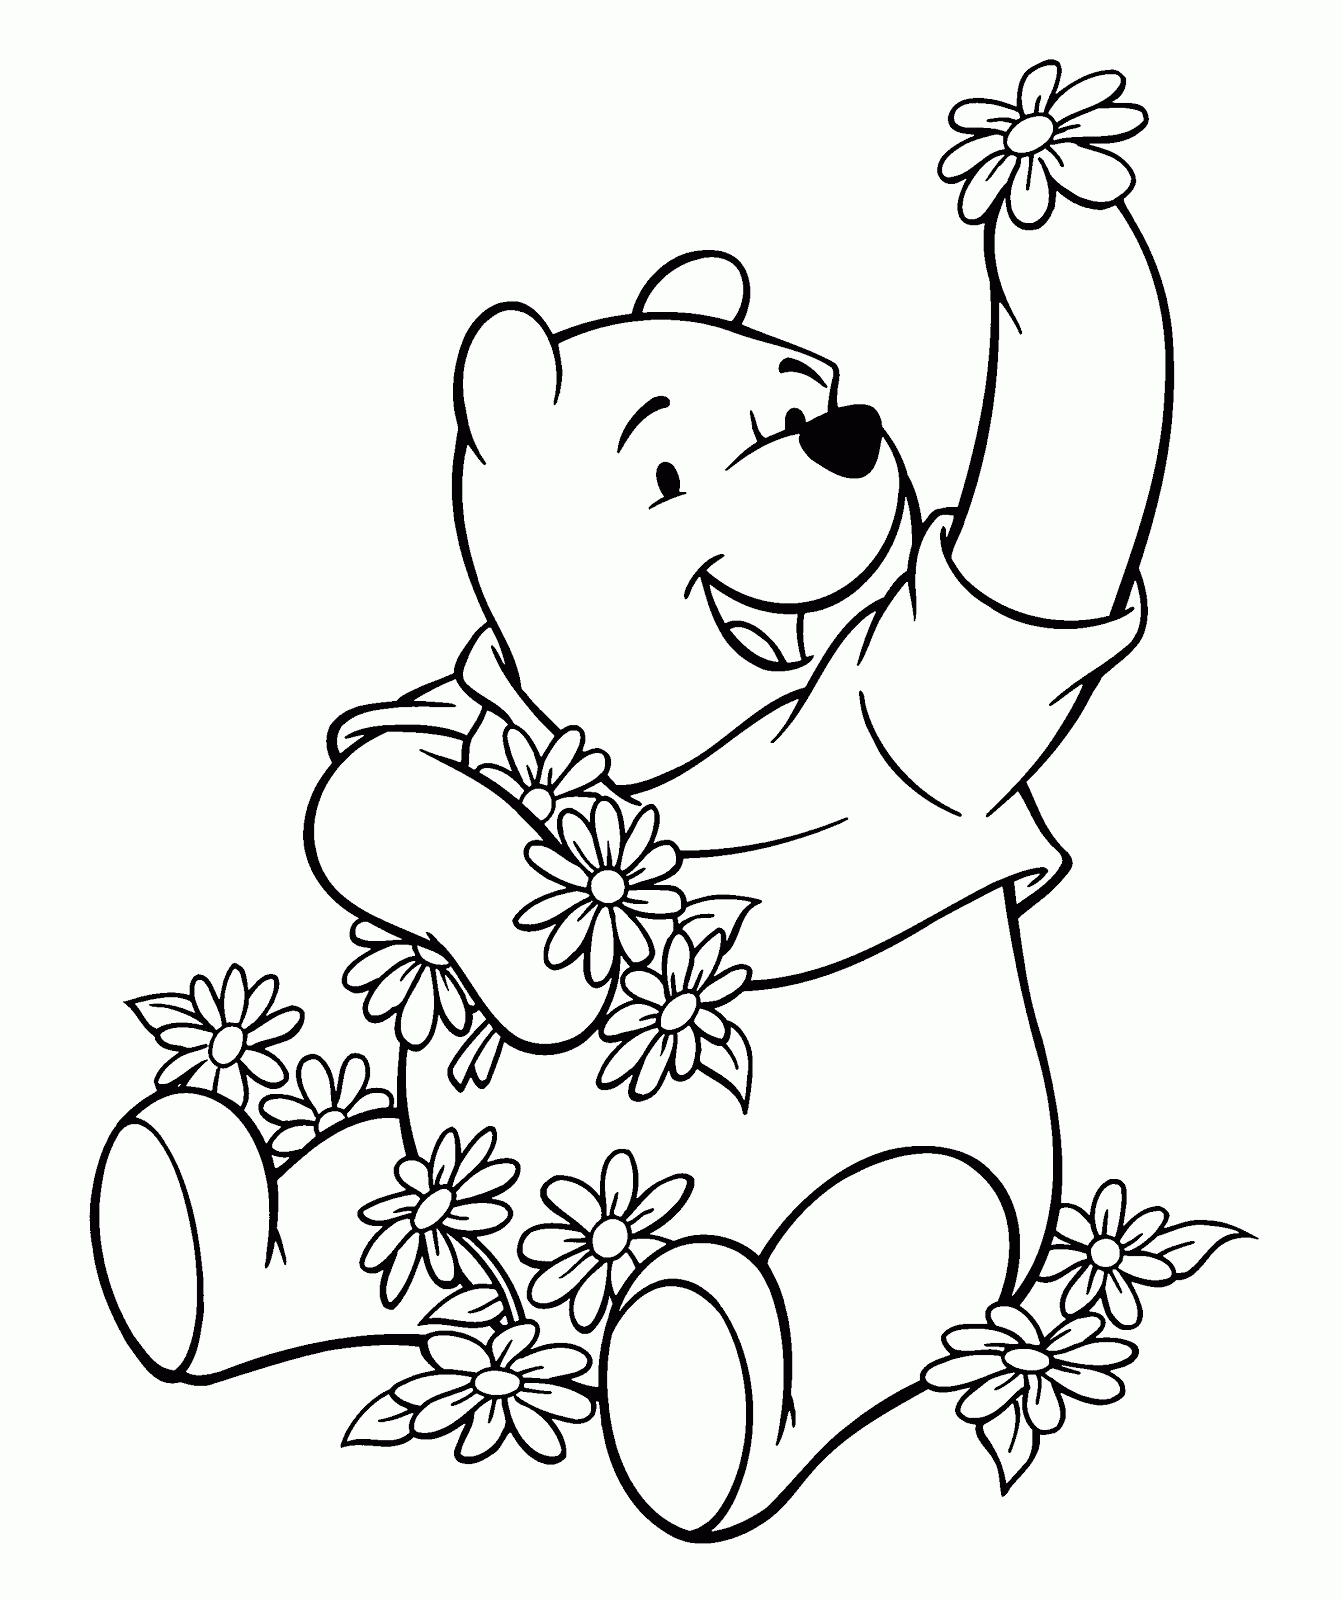 disney character coloring pages disney animal quot goofy quot coloring pages pages coloring character disney 